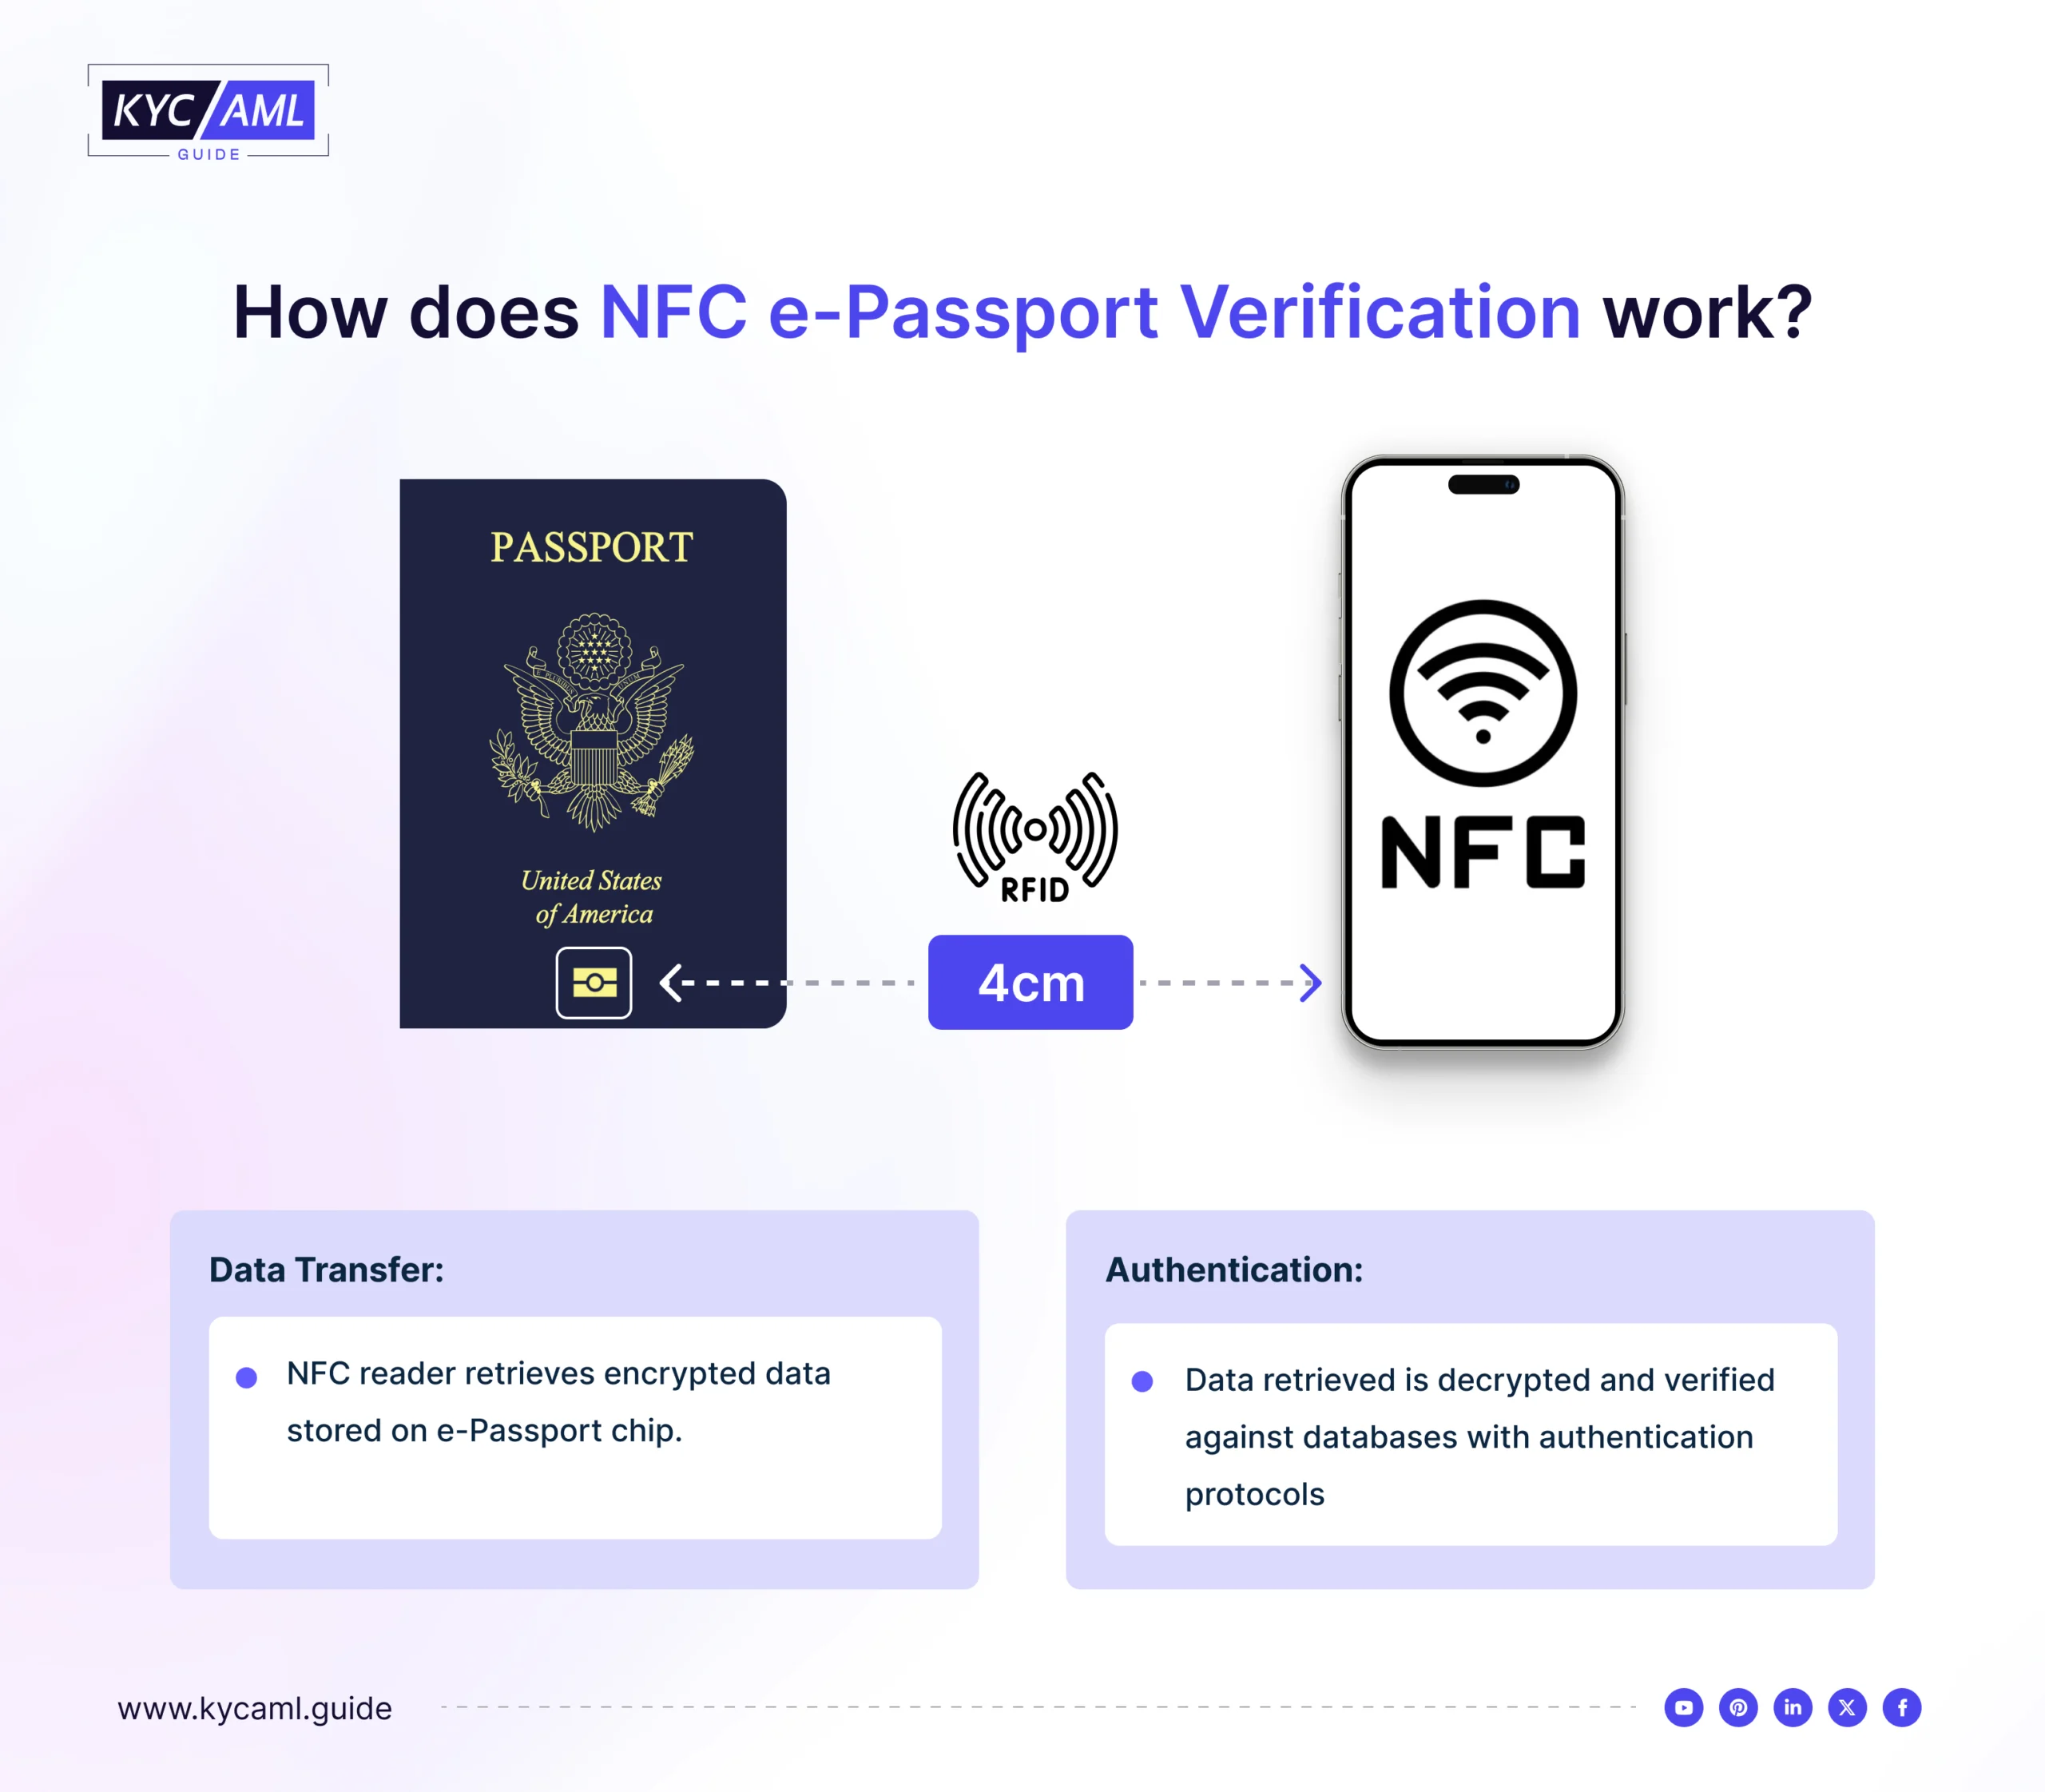 The process of NFC e-passport verification requires NFC-enabled devices at a close proximity (4 cm distance). It is highly accurate yet has its own limitations.